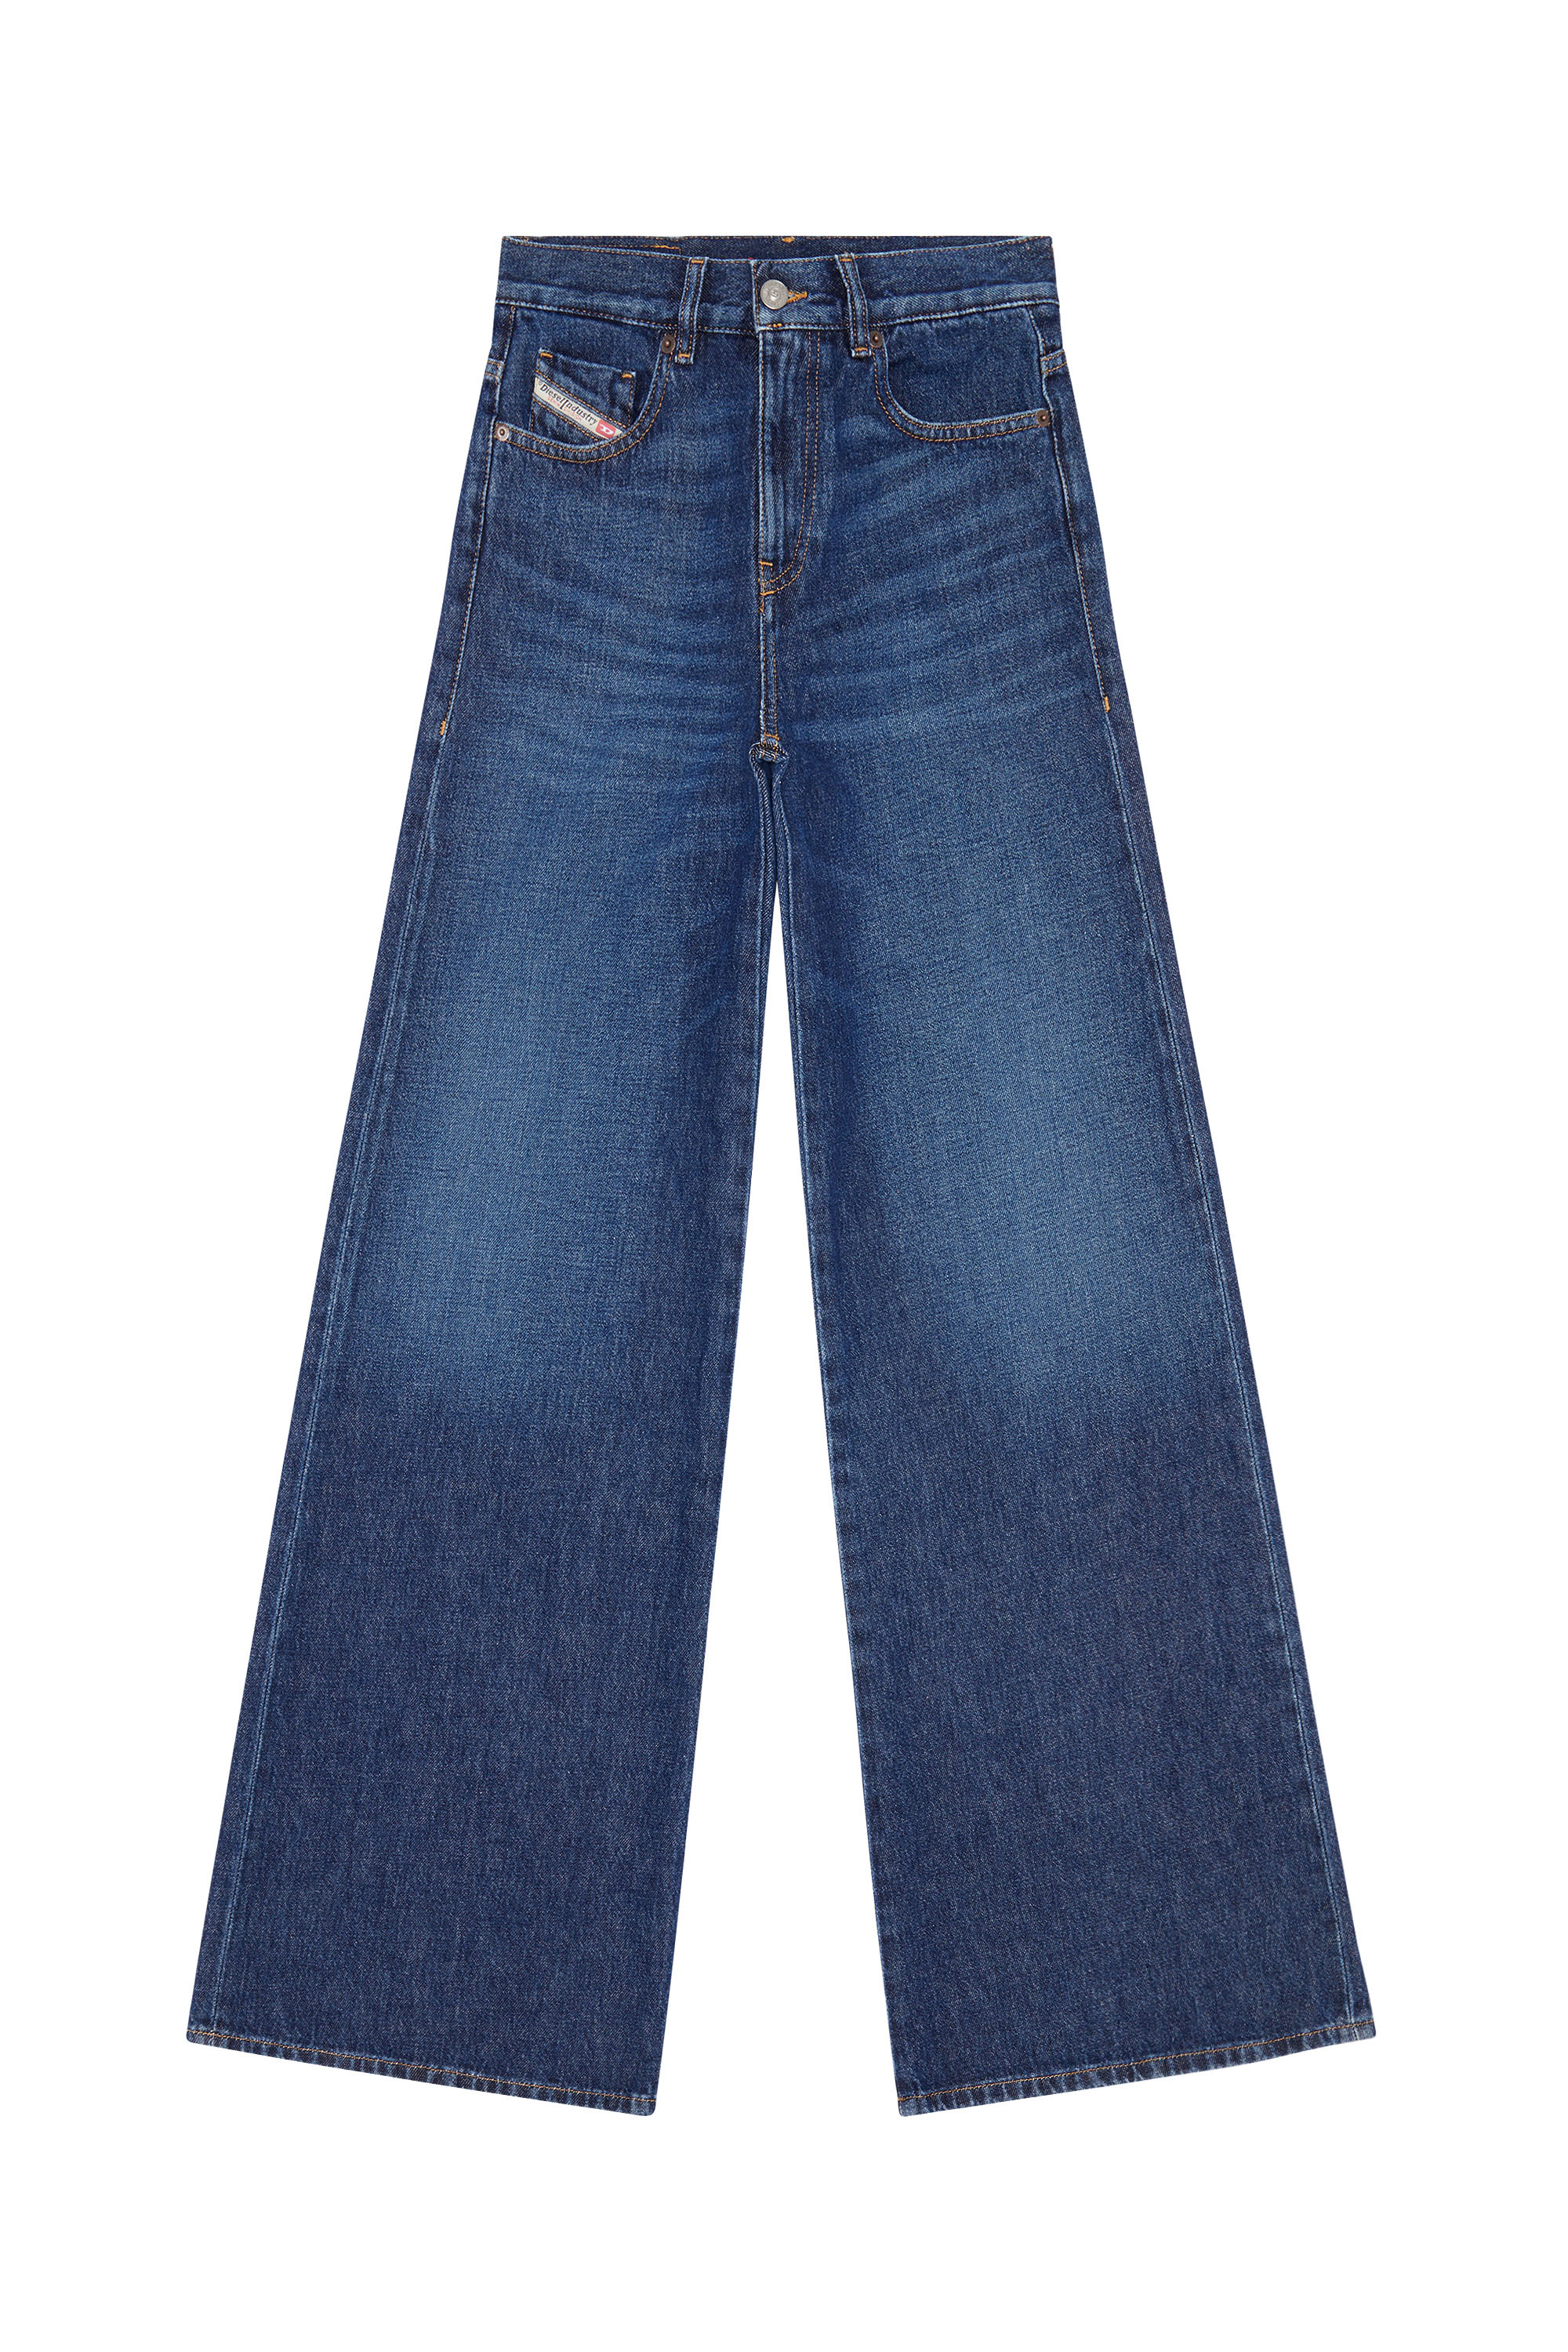 1978 09C03 Bootcut and Flare Jeans, Azul Oscuro - Vaqueros